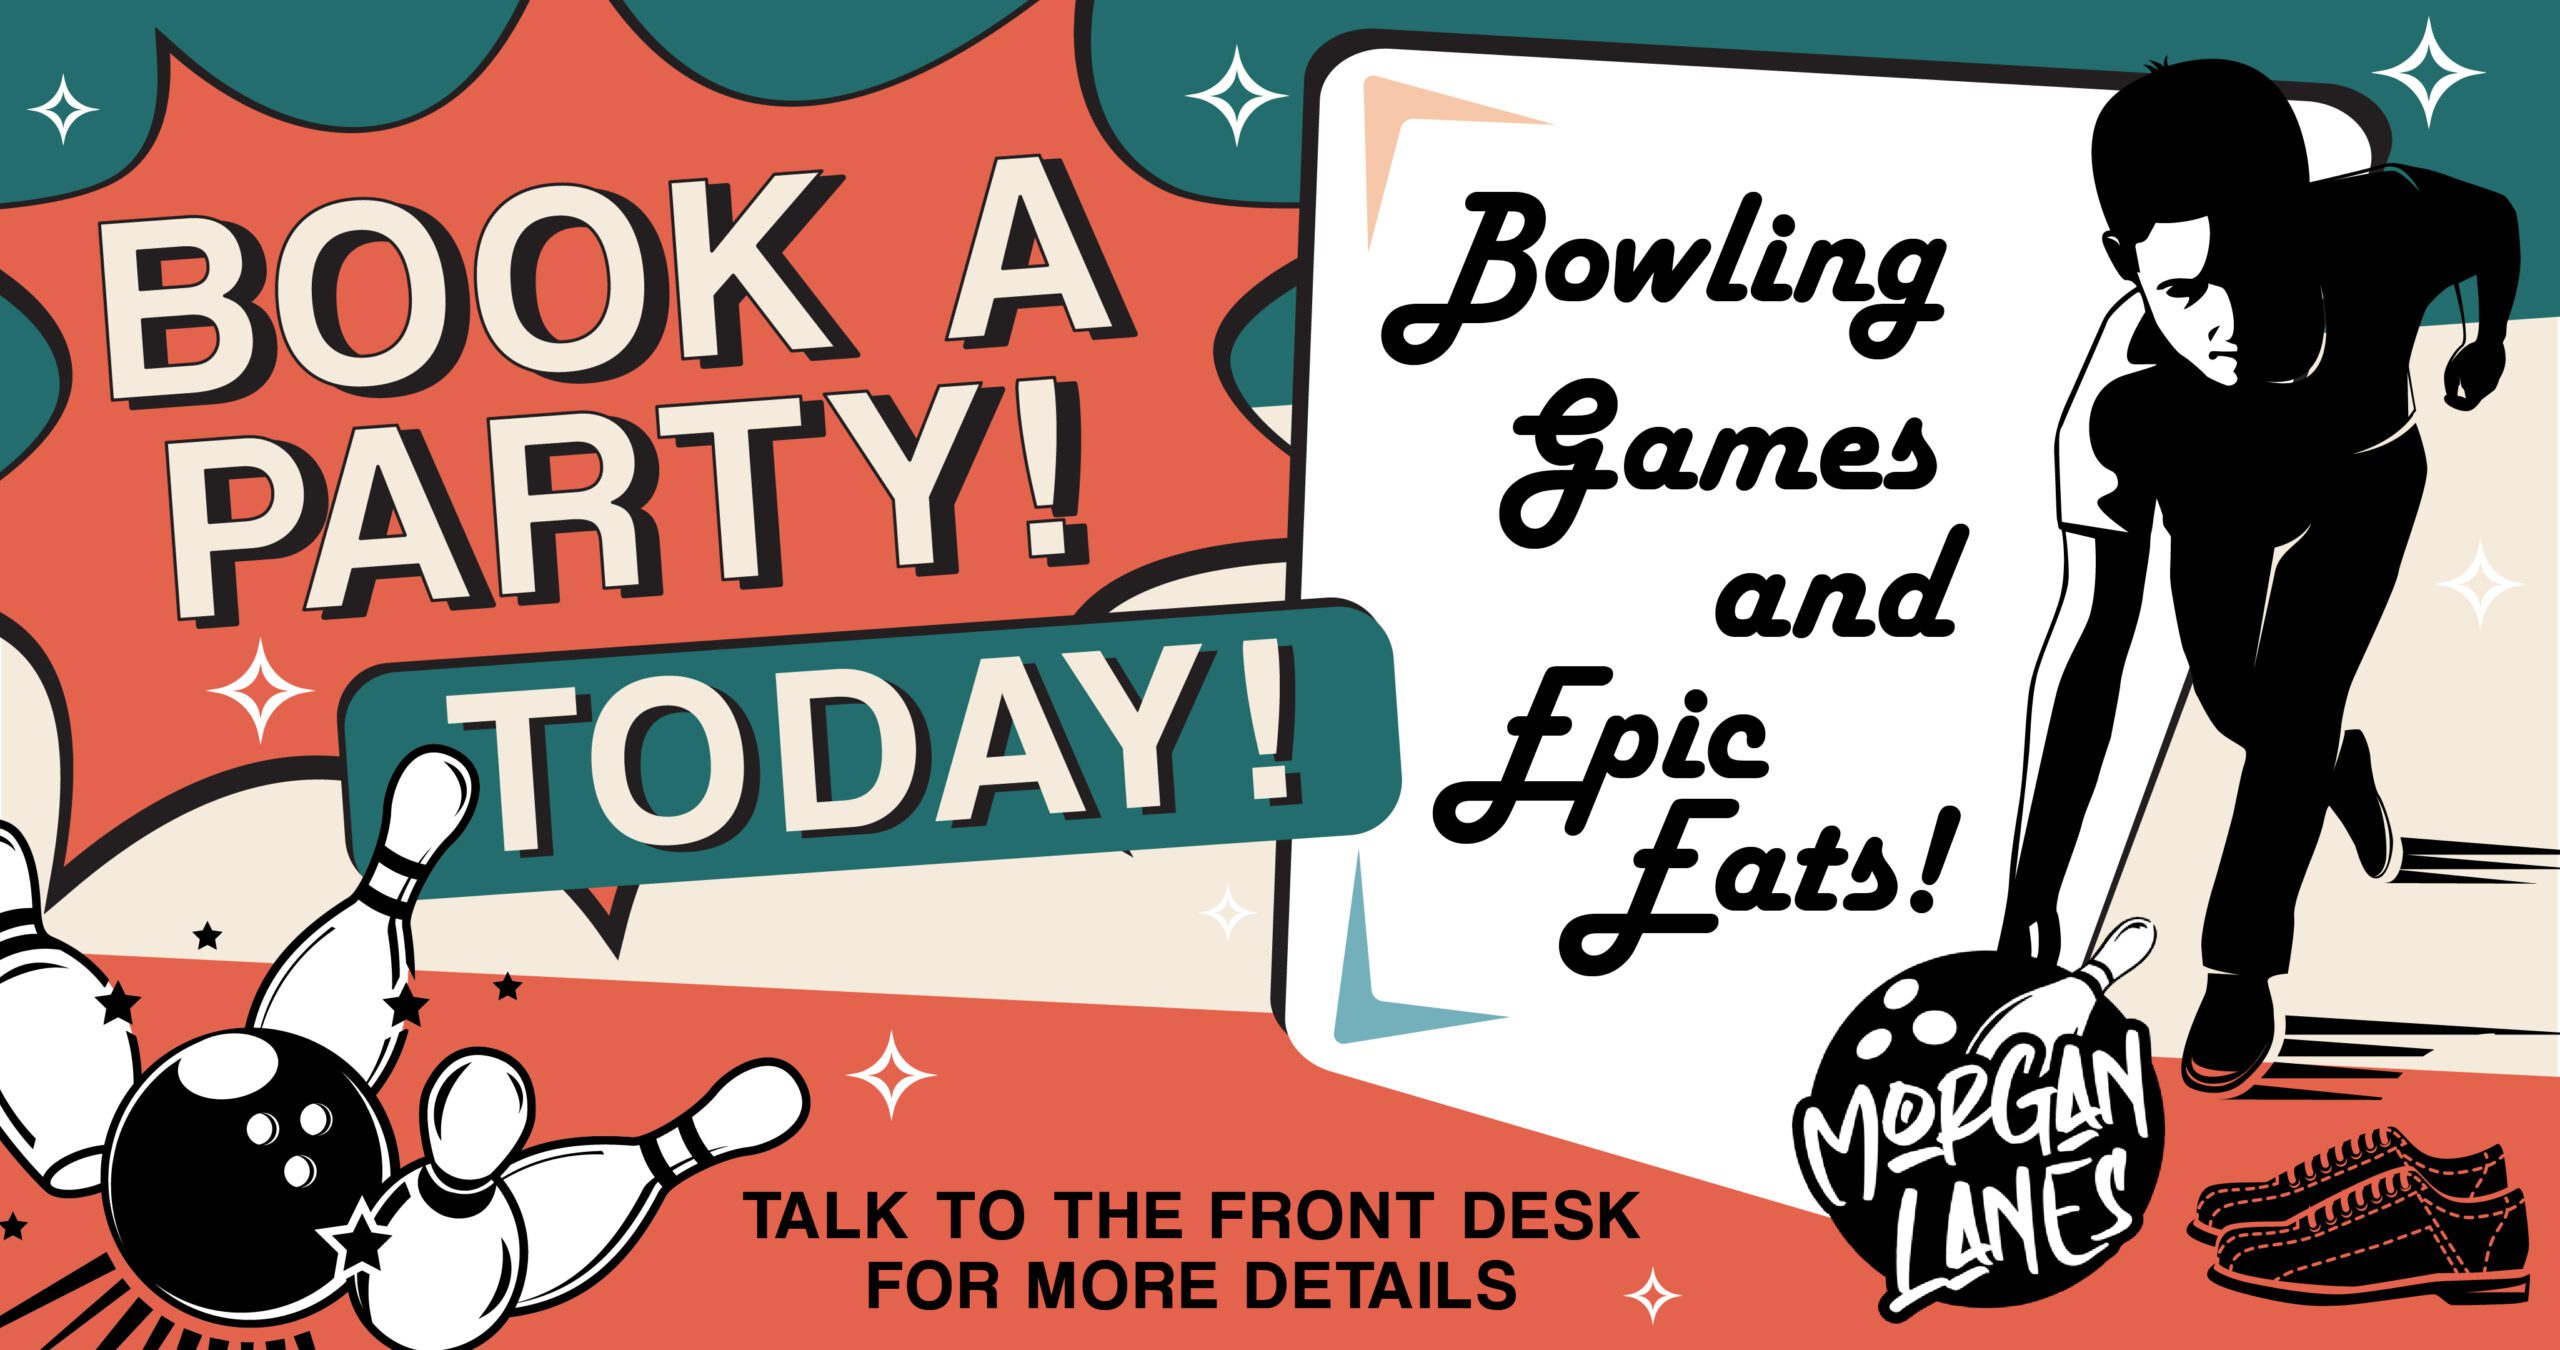 bowling party booking retro graphic